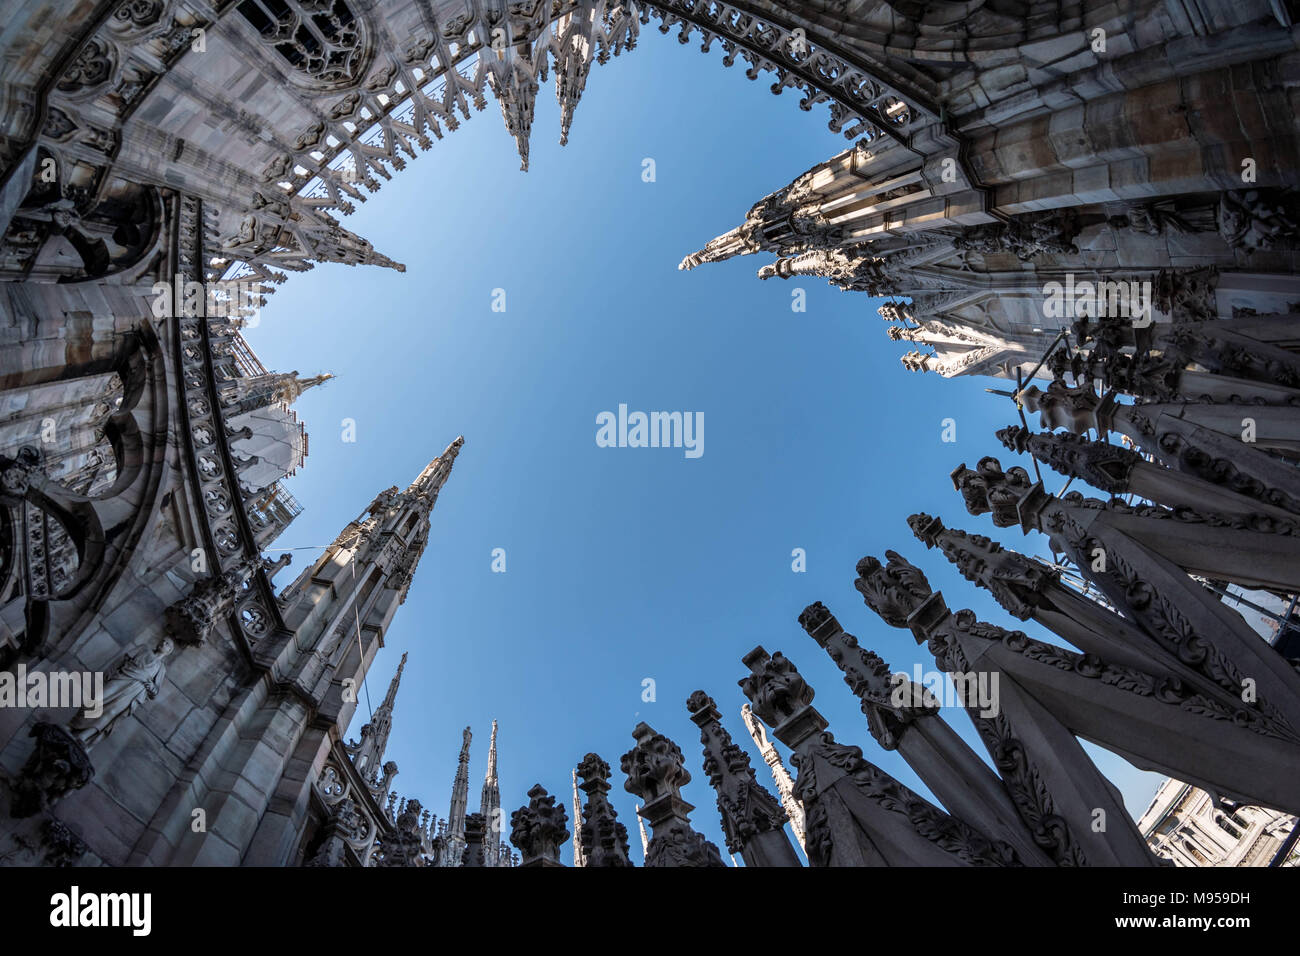 Skywards view to the ornate towers of the Duomo Cathedral in Milan, Italy Stock Photo